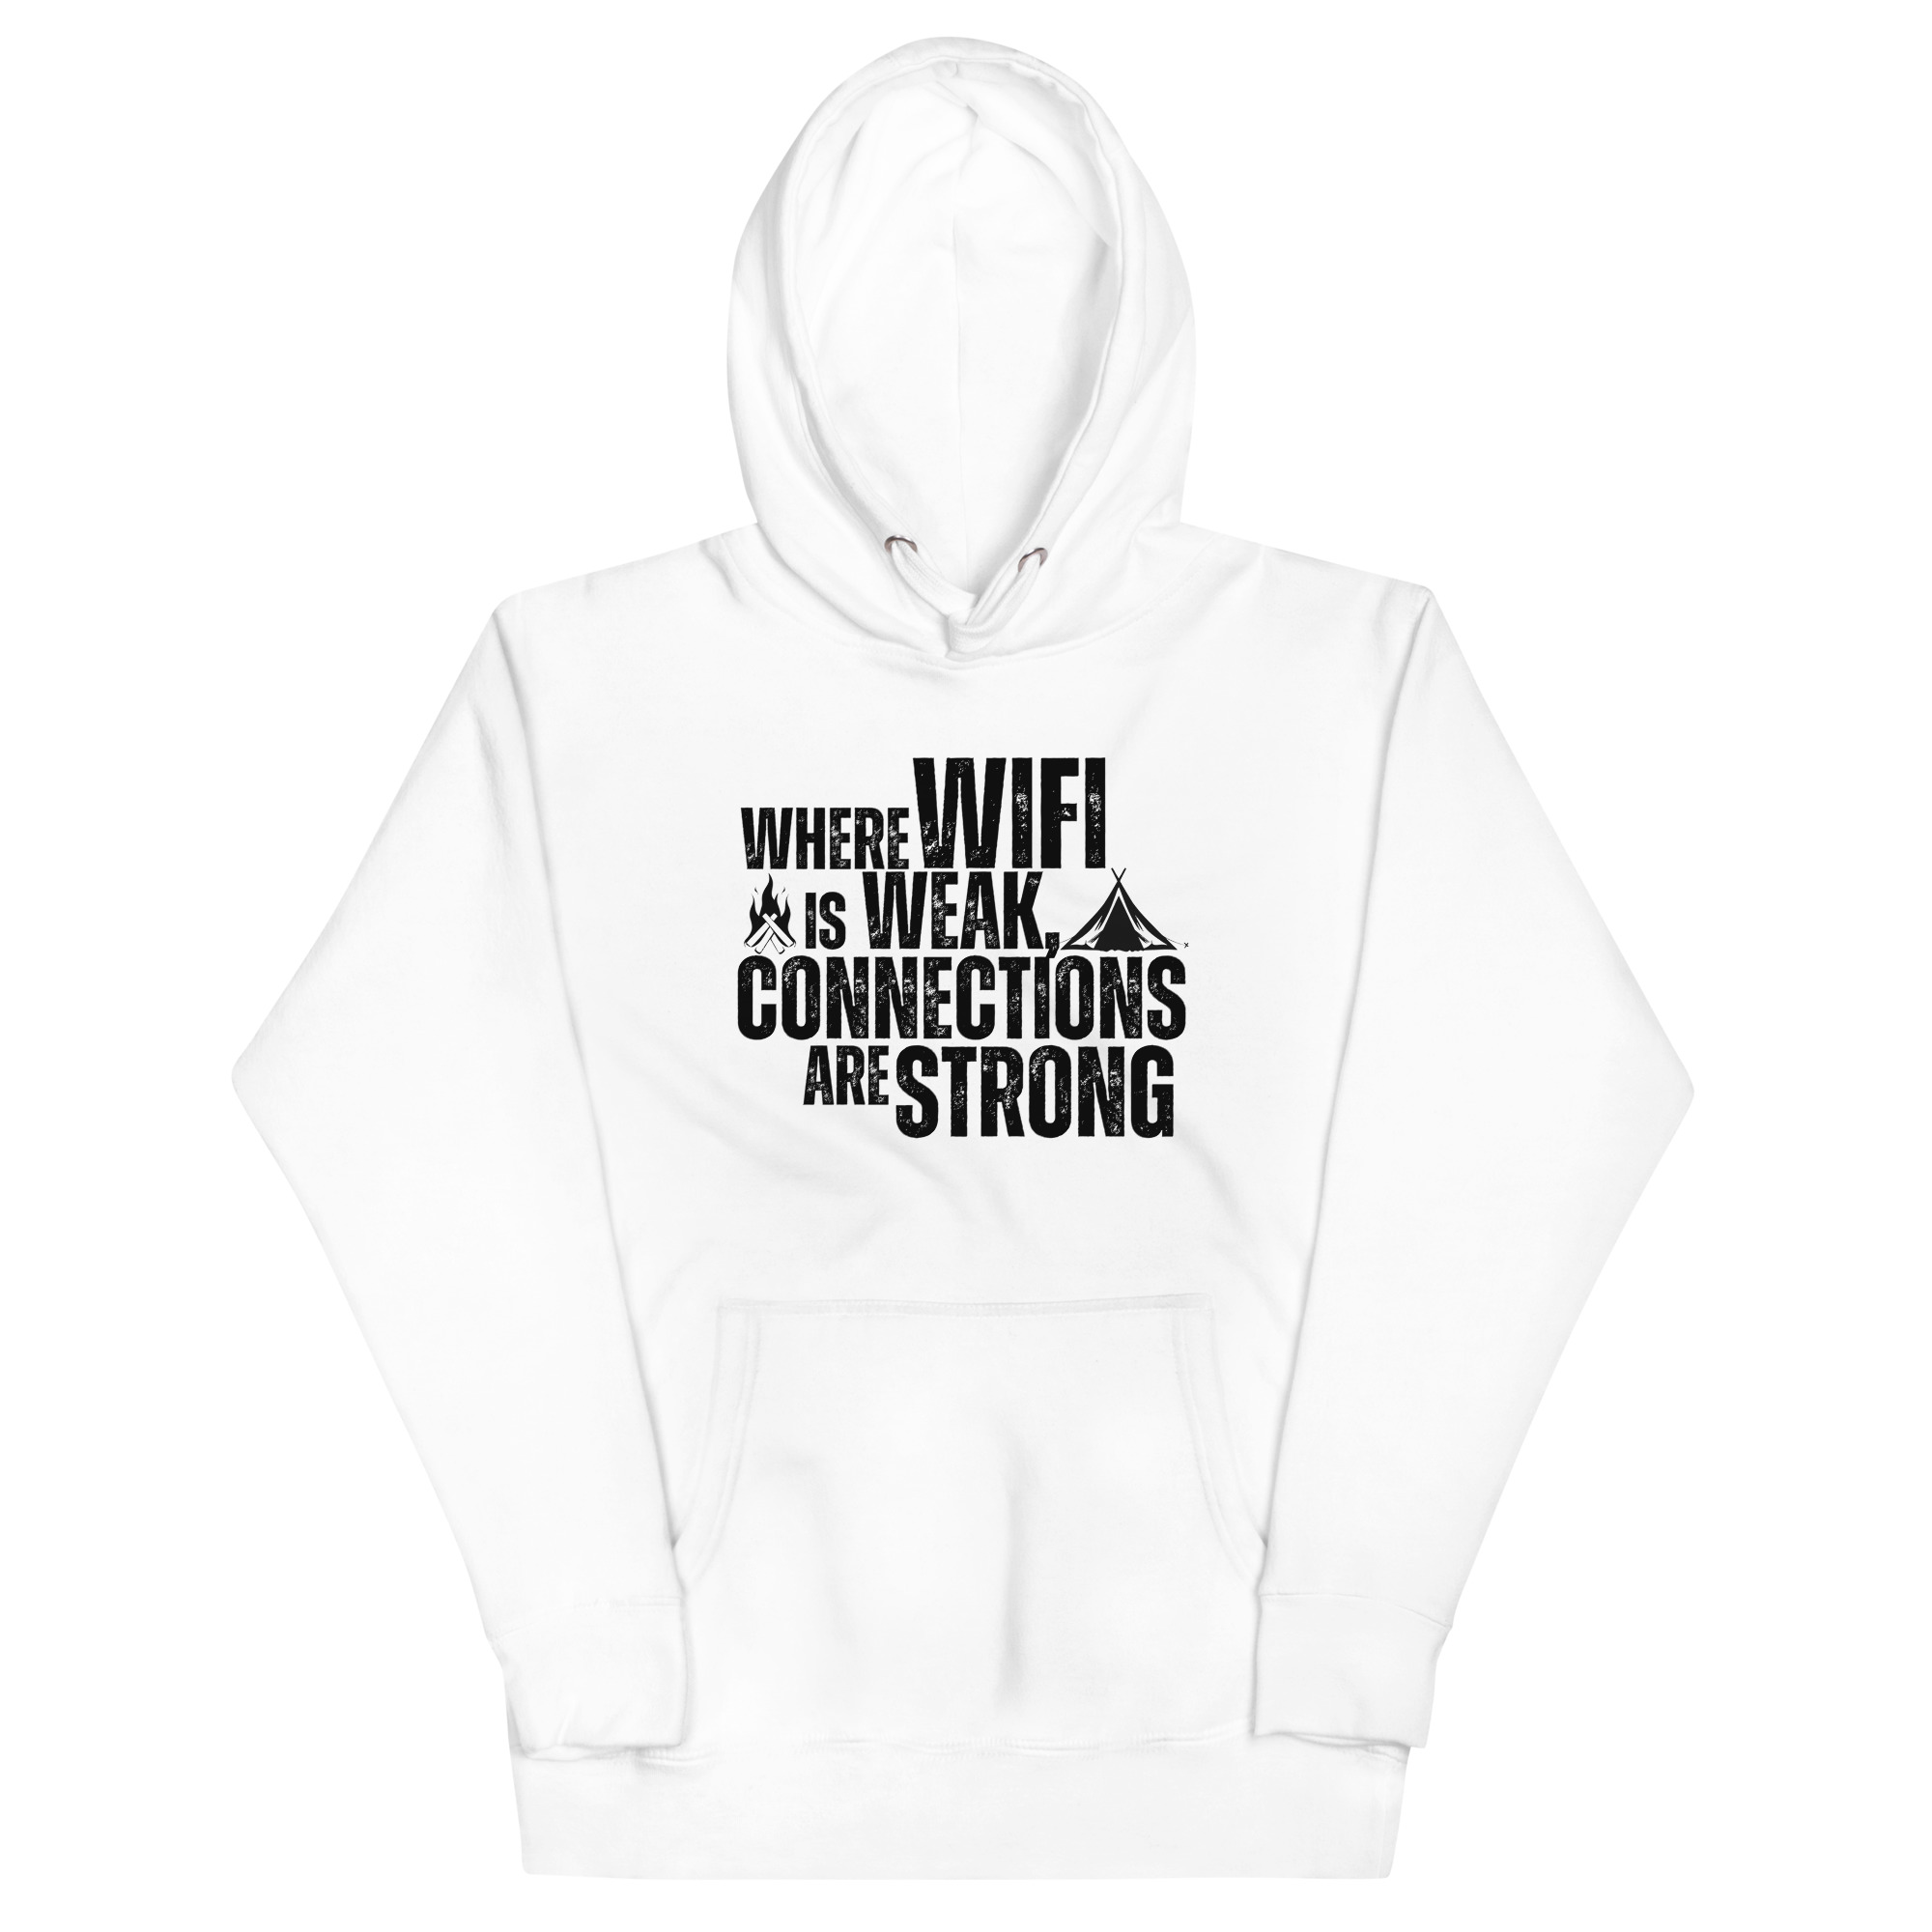 Where WiFi is Weak Connections are strong outdoor adventure Unisex Hoodie